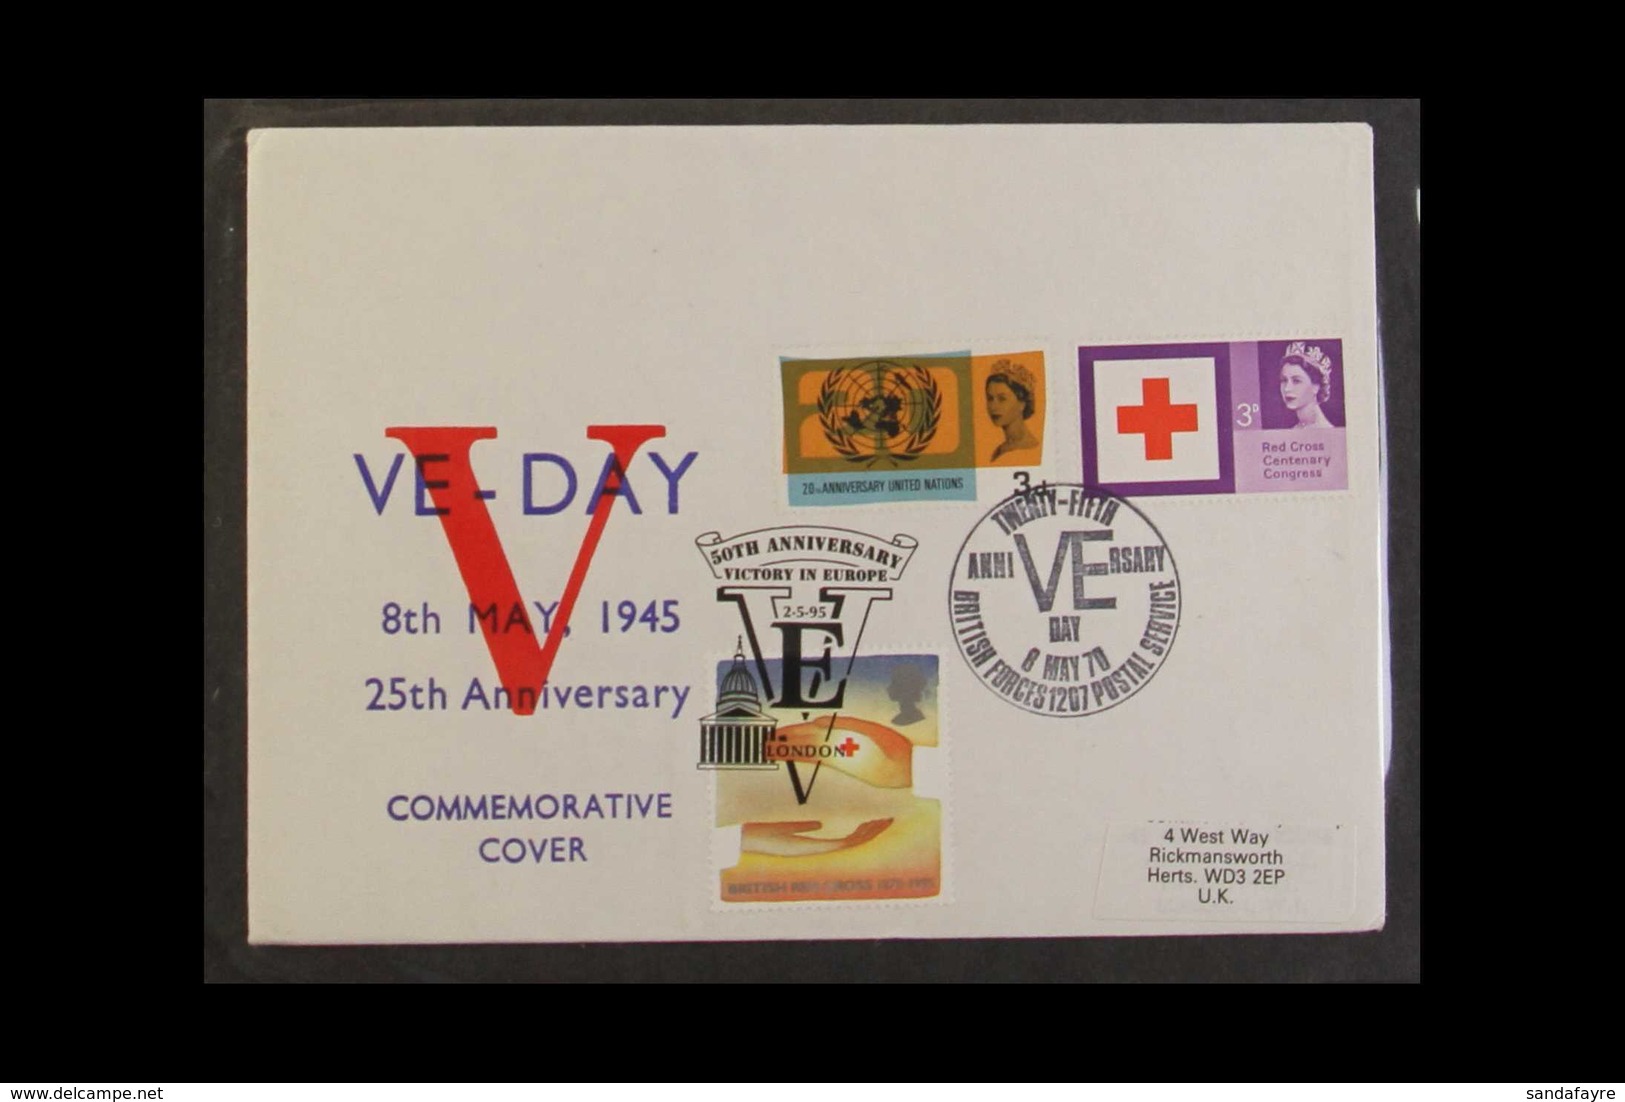 "VE" DAY COVERS COLLECTION 1995 50th Anniversary Of Victory In Europe (VE) Day Collection Of Great Britain Special Comme - Unclassified